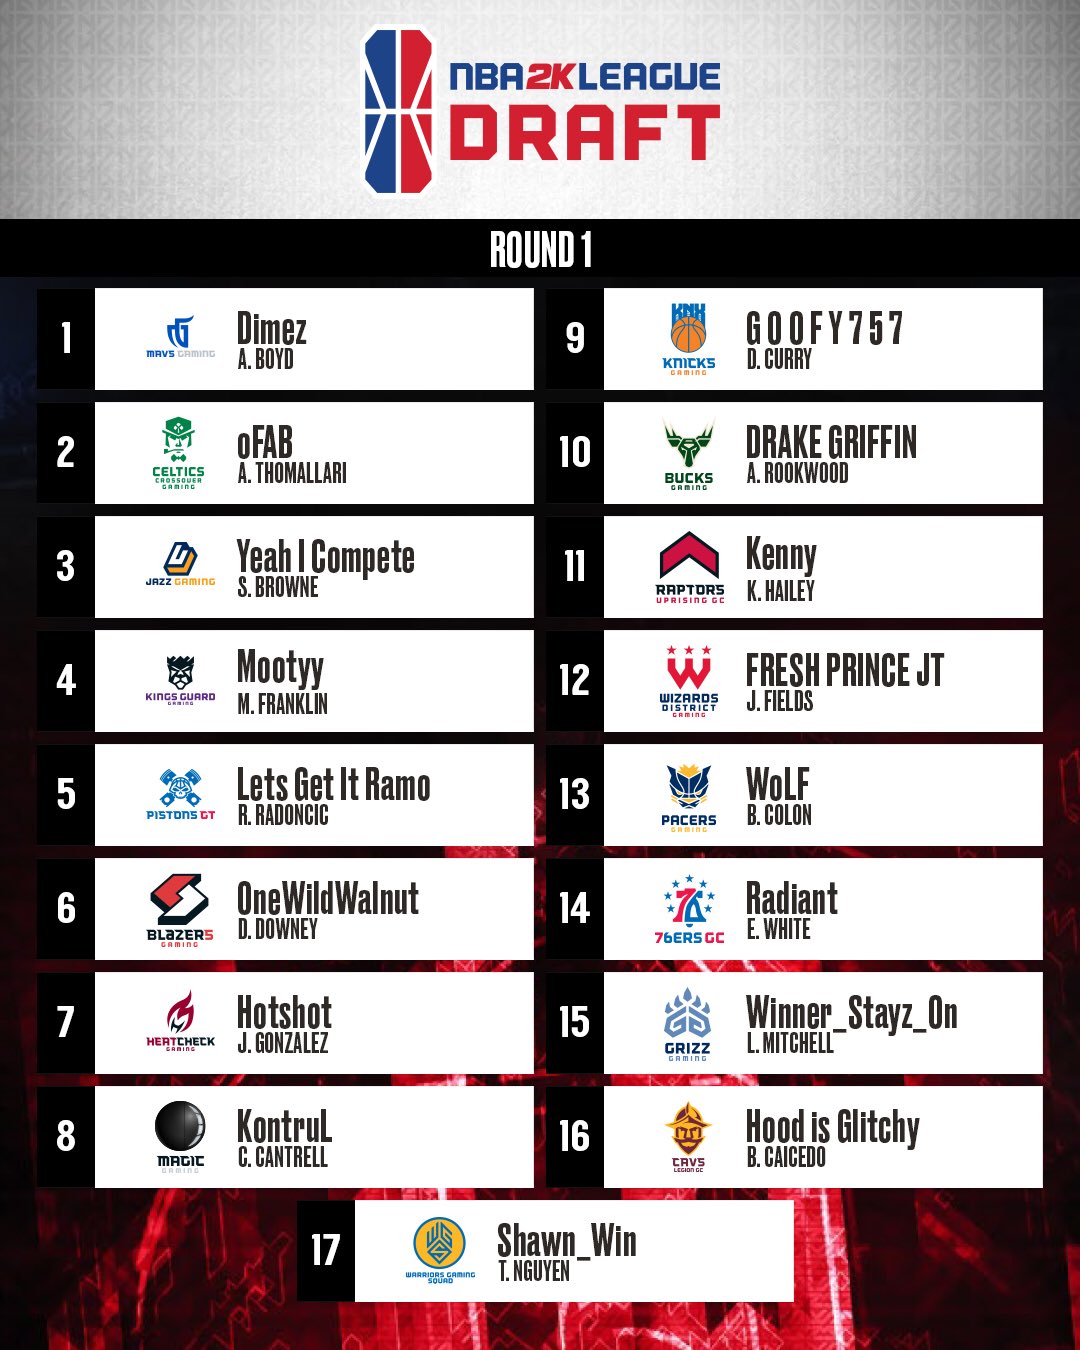 NBA 2K League Draft Results (Updated). Dimez Goes 1 Overall to Mavs